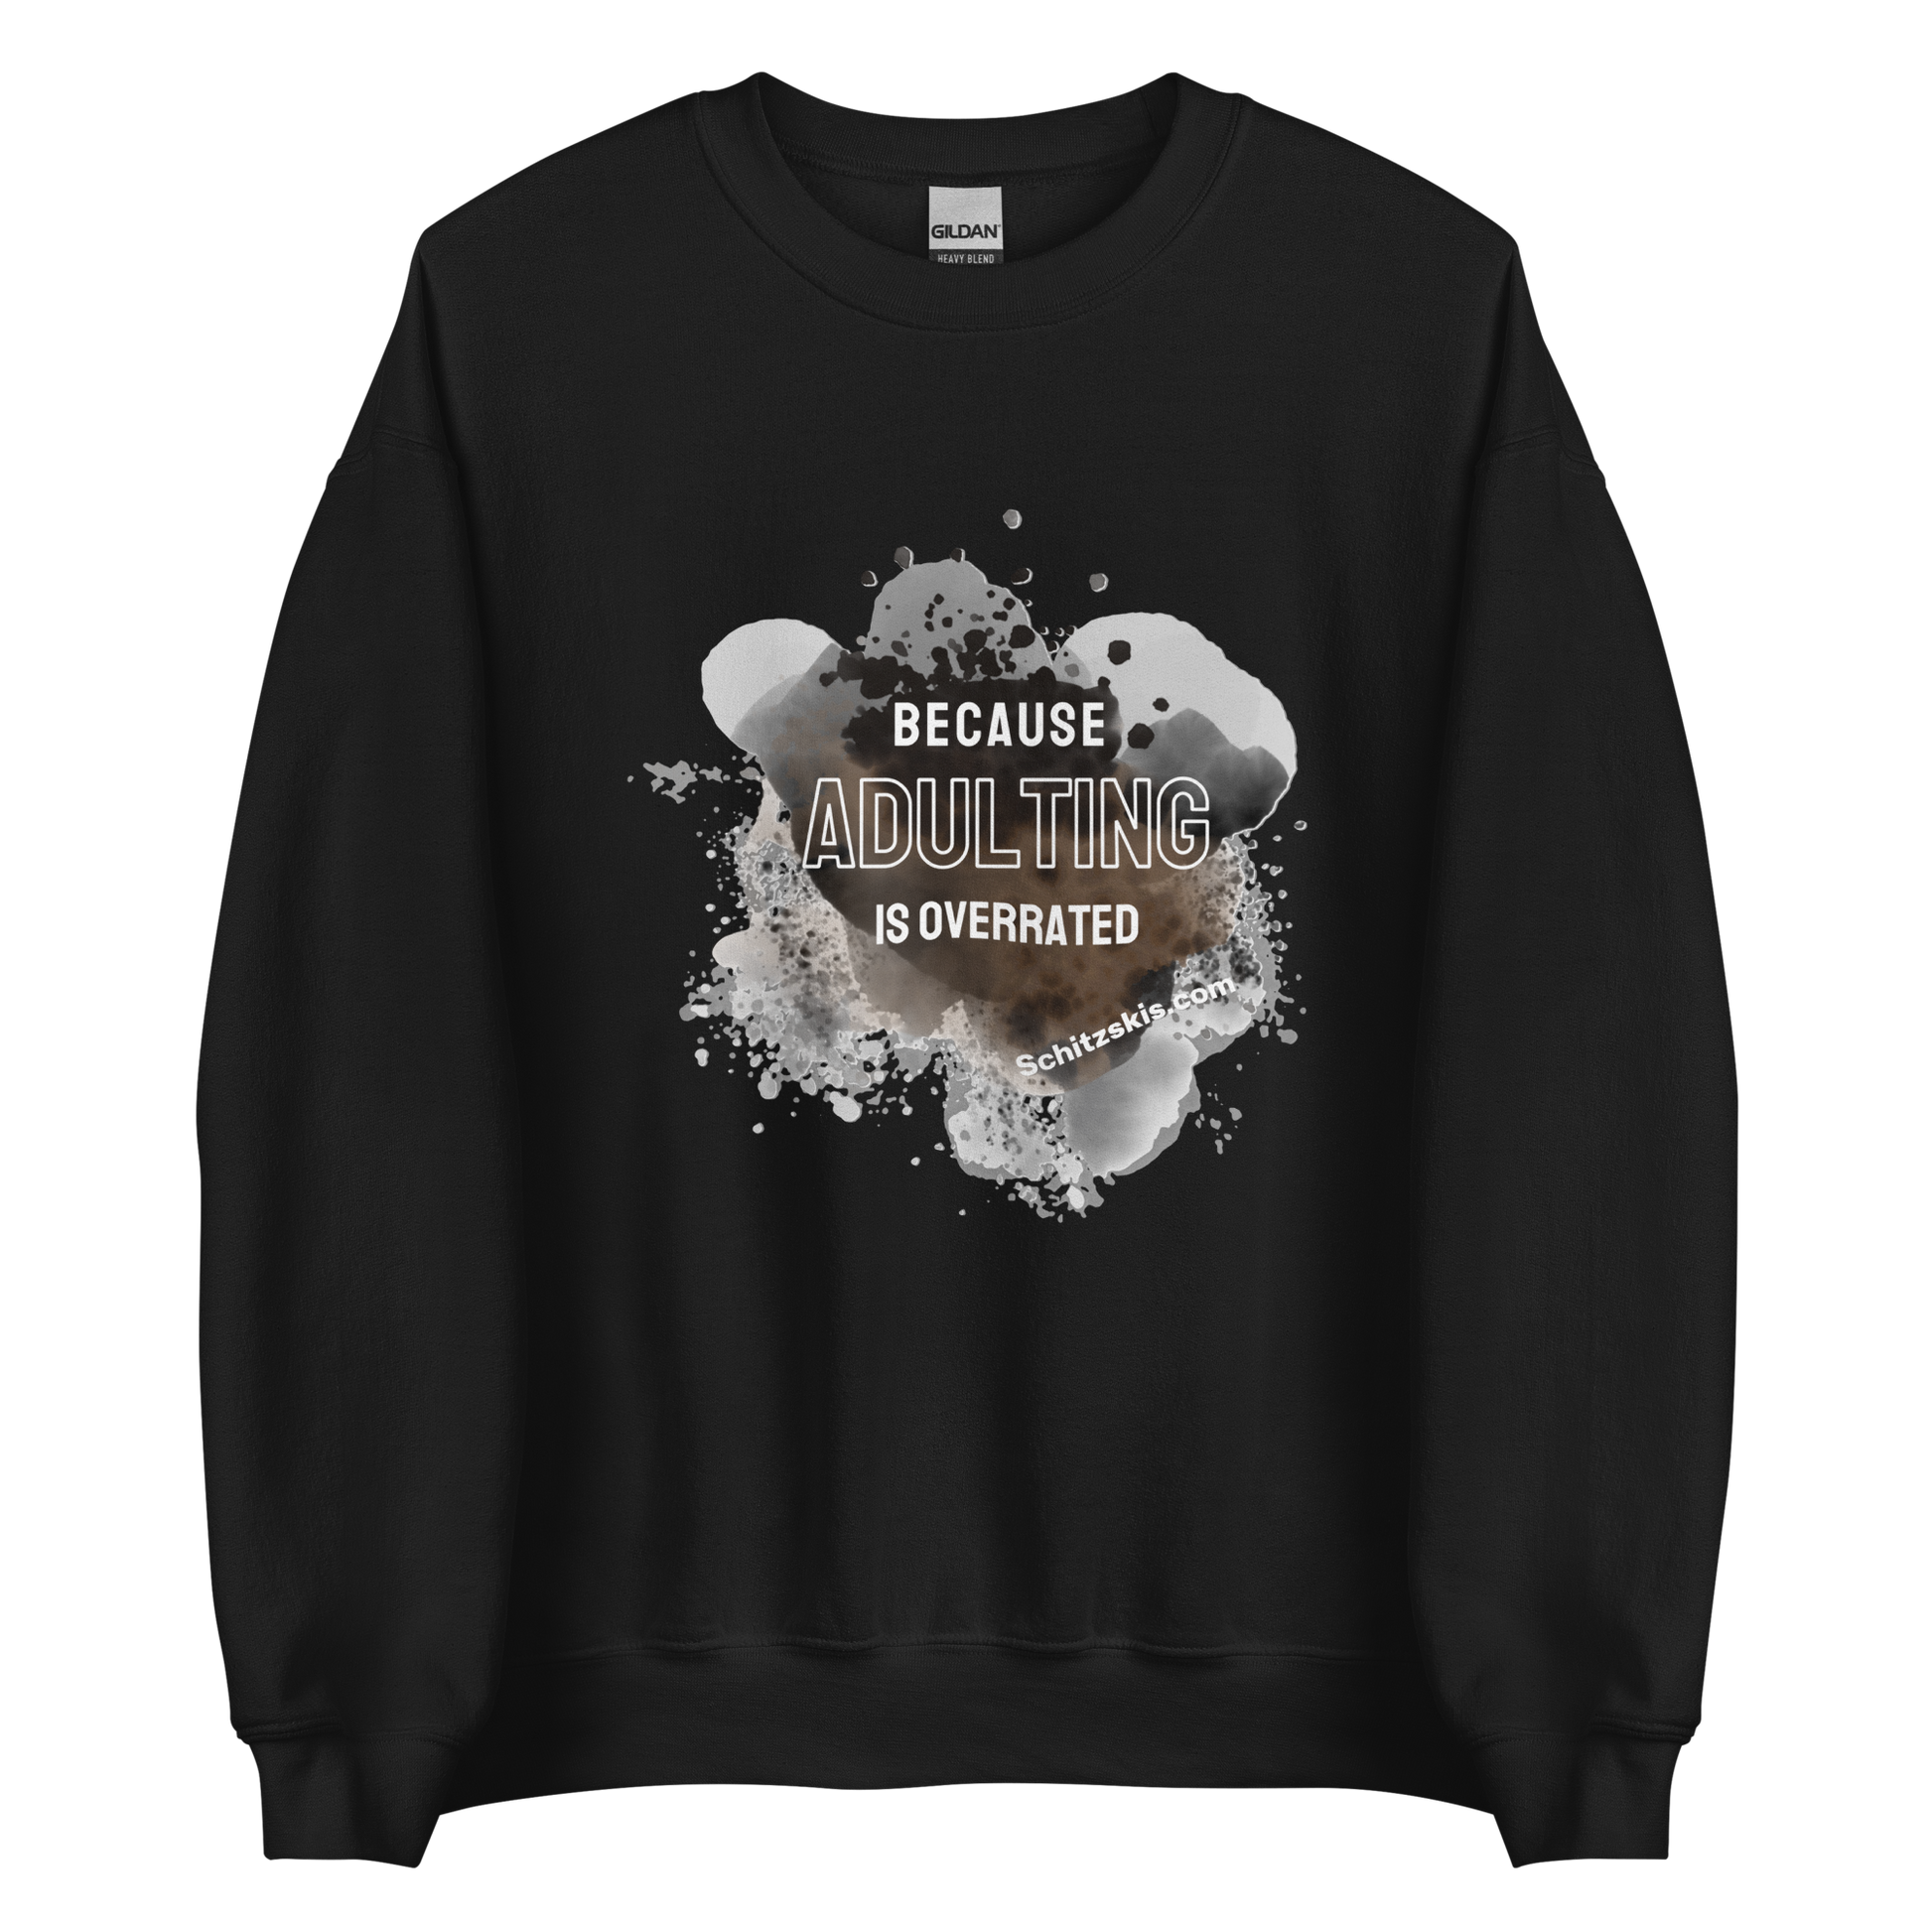 Adulting is Overrated Unisex Sweatshirt in Black color front view